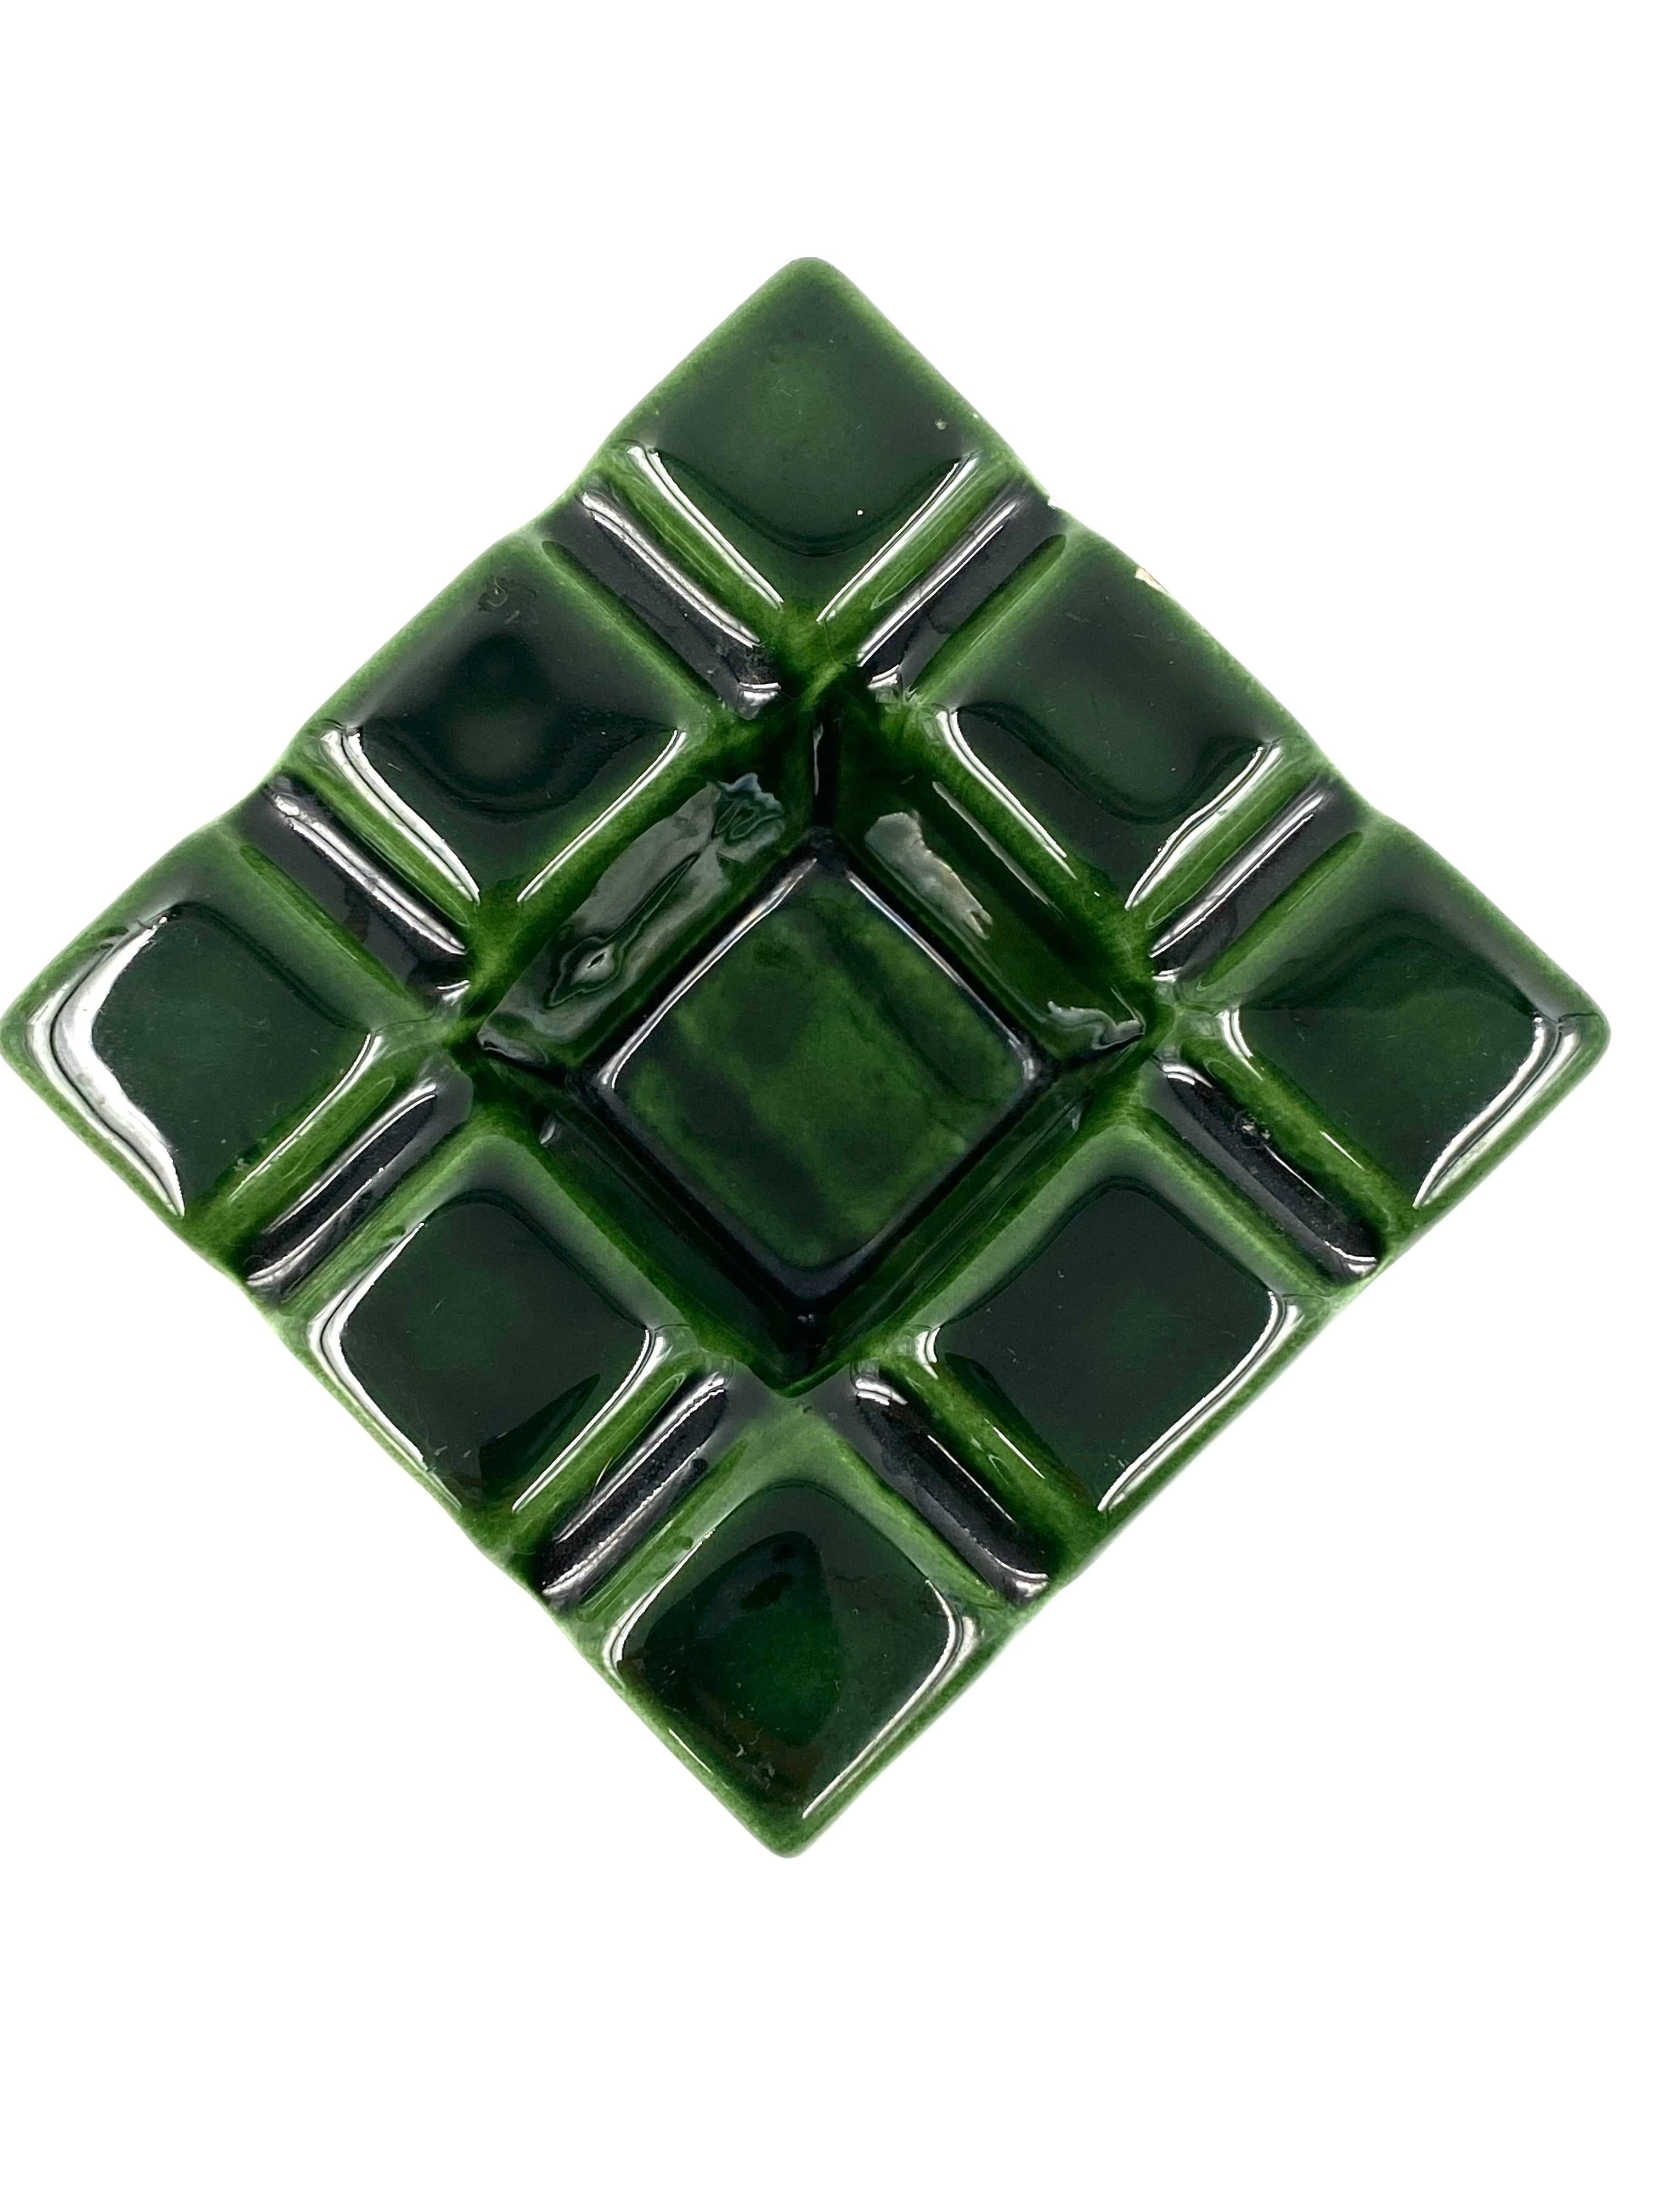 Green cubic ceramic ashtray.

Sicart 1970s, Italy

Measures : H: 9 cm

11.5 x 11.5 cm

Conditions: Good consistent with age use. Small chip on one angle.